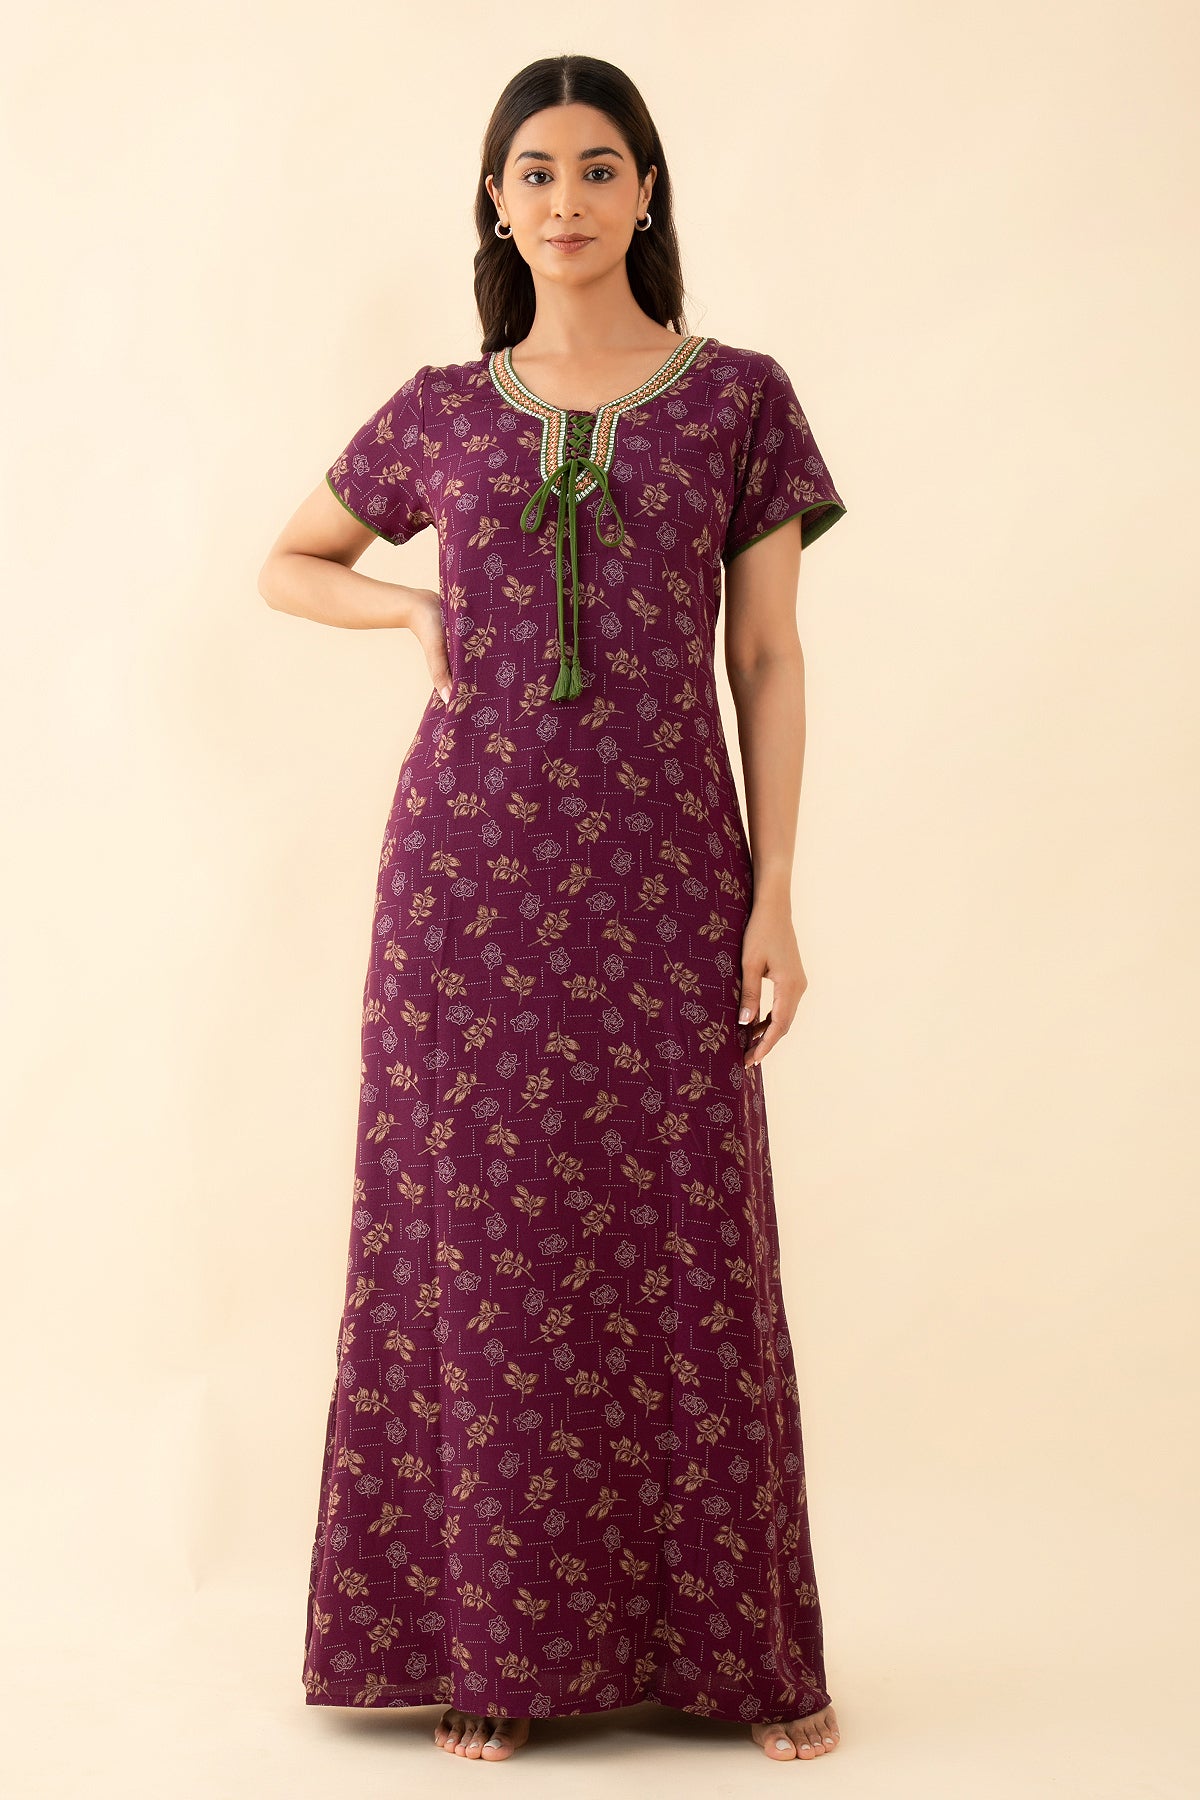 All Over Floral Print With Embroidered Yoke Nighty - Purple